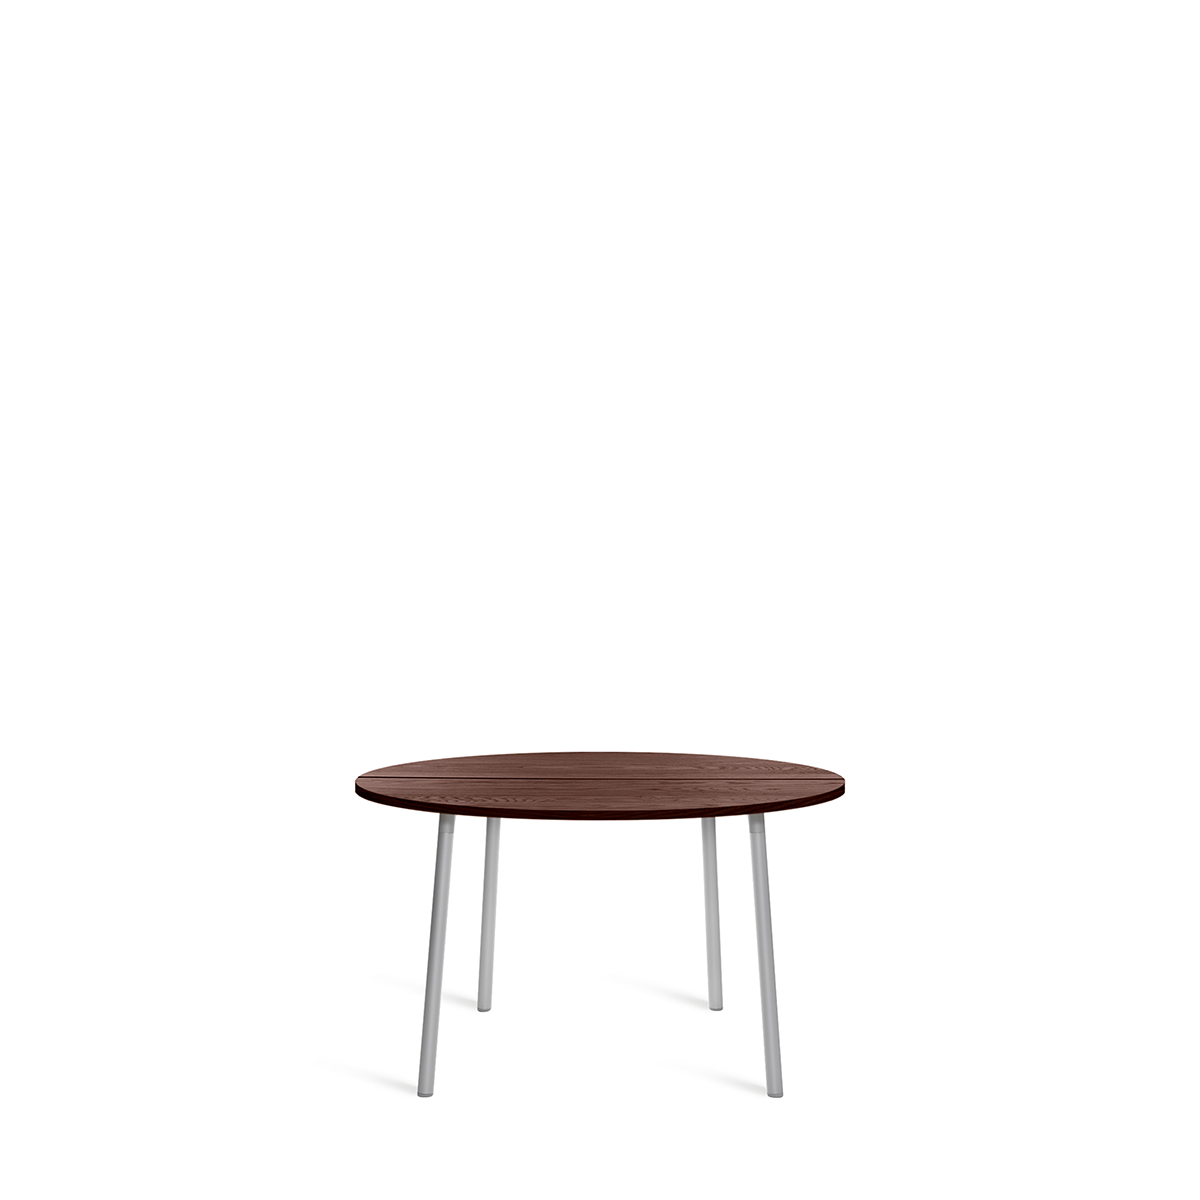 Run Cafe Table by Sam Hecht and Kim Colin